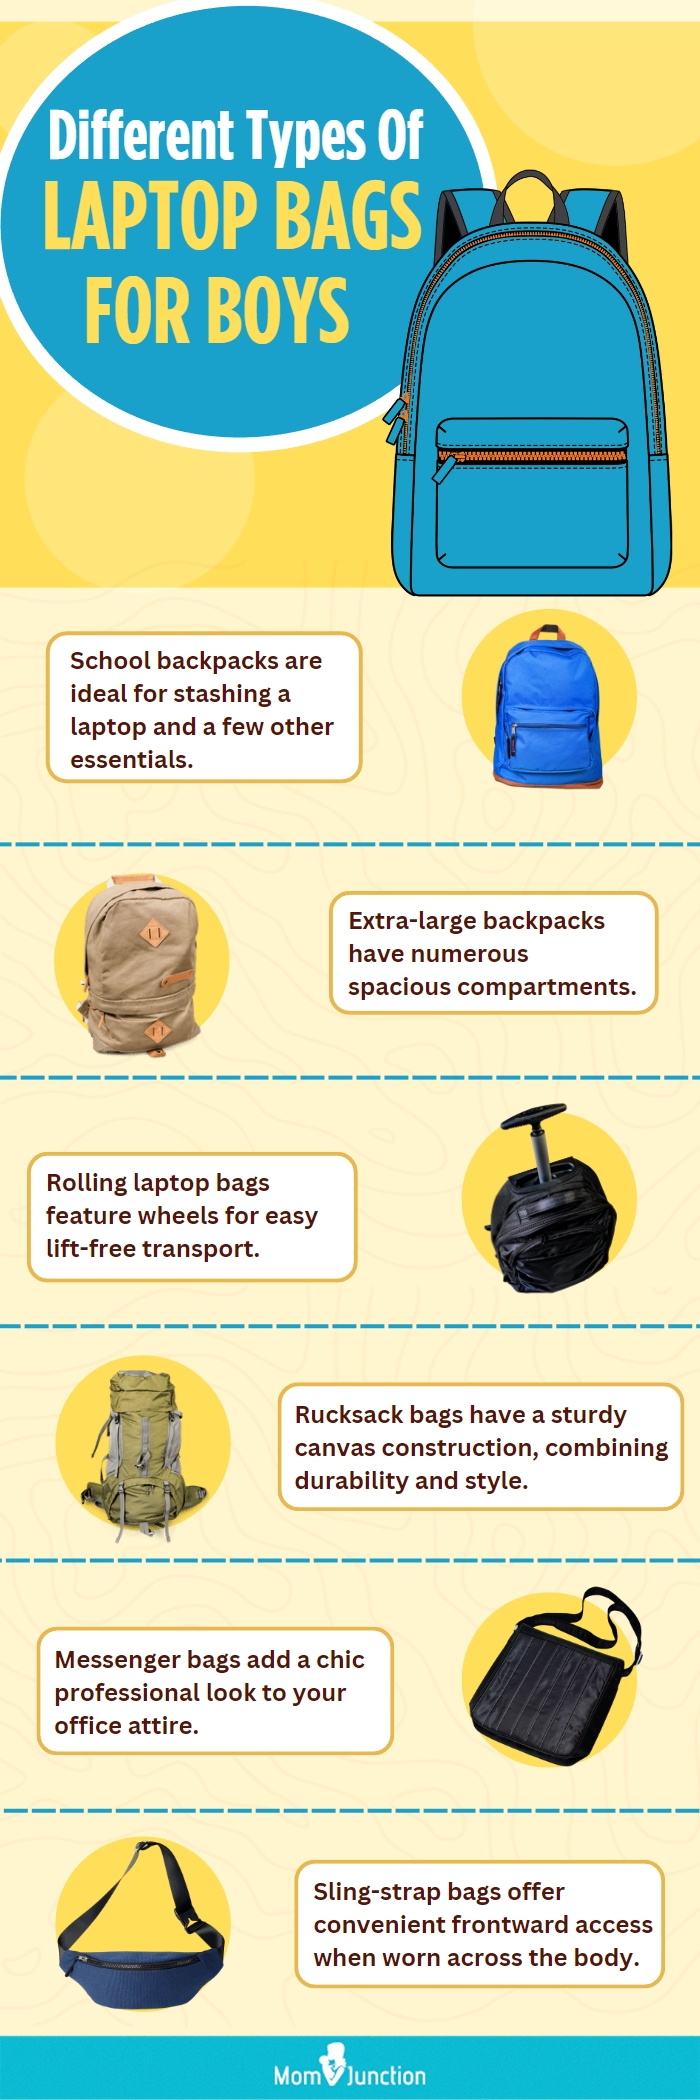 Different Types Of Laptop Bags For Boys (infographic)